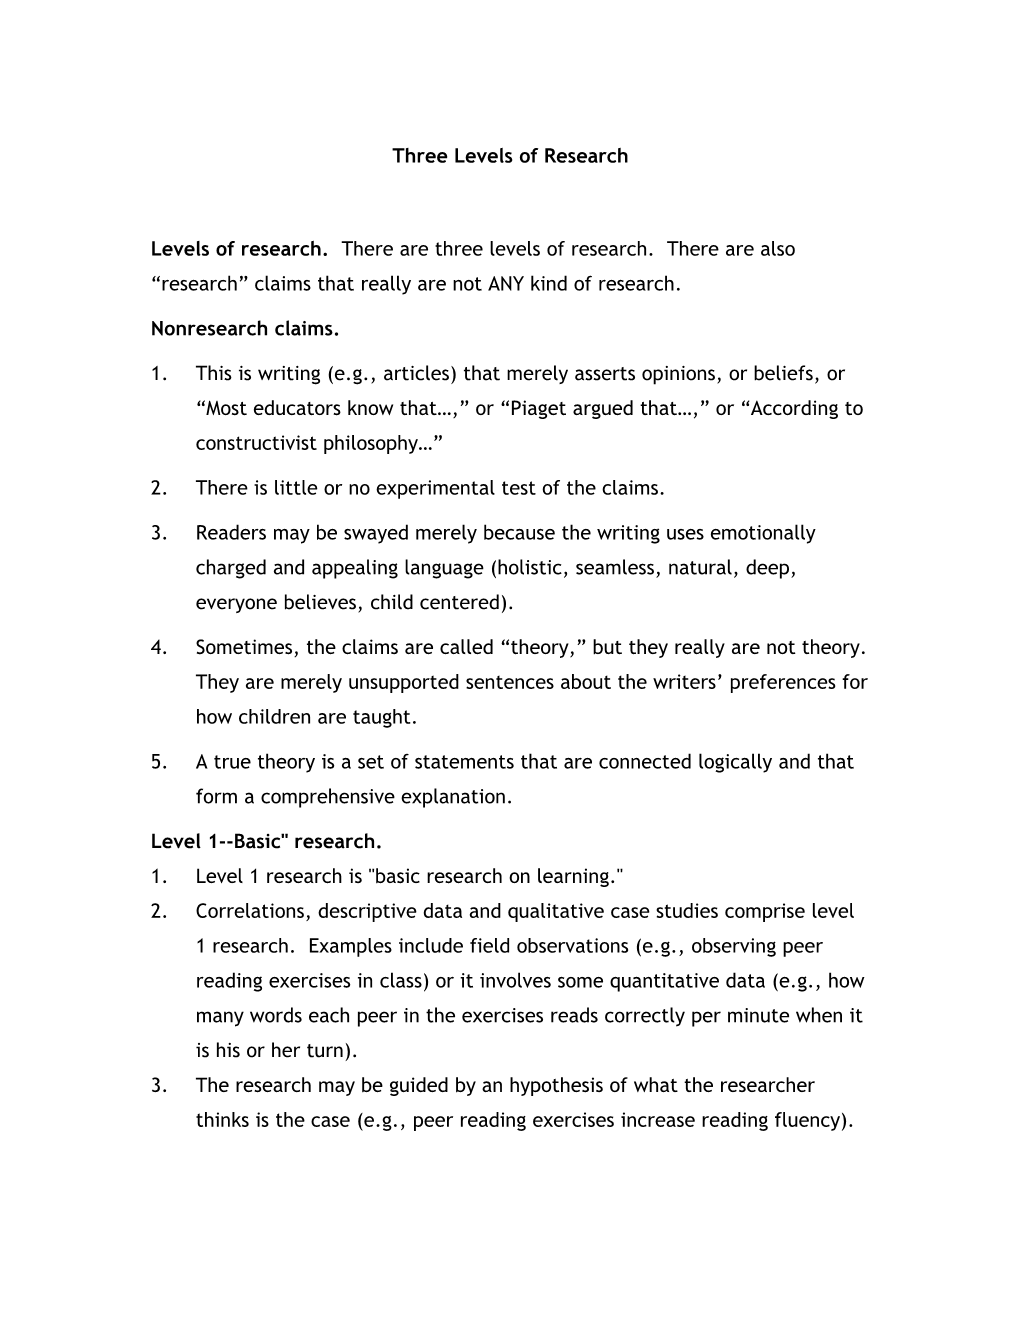 Lecture Notes for Online Learning Activity